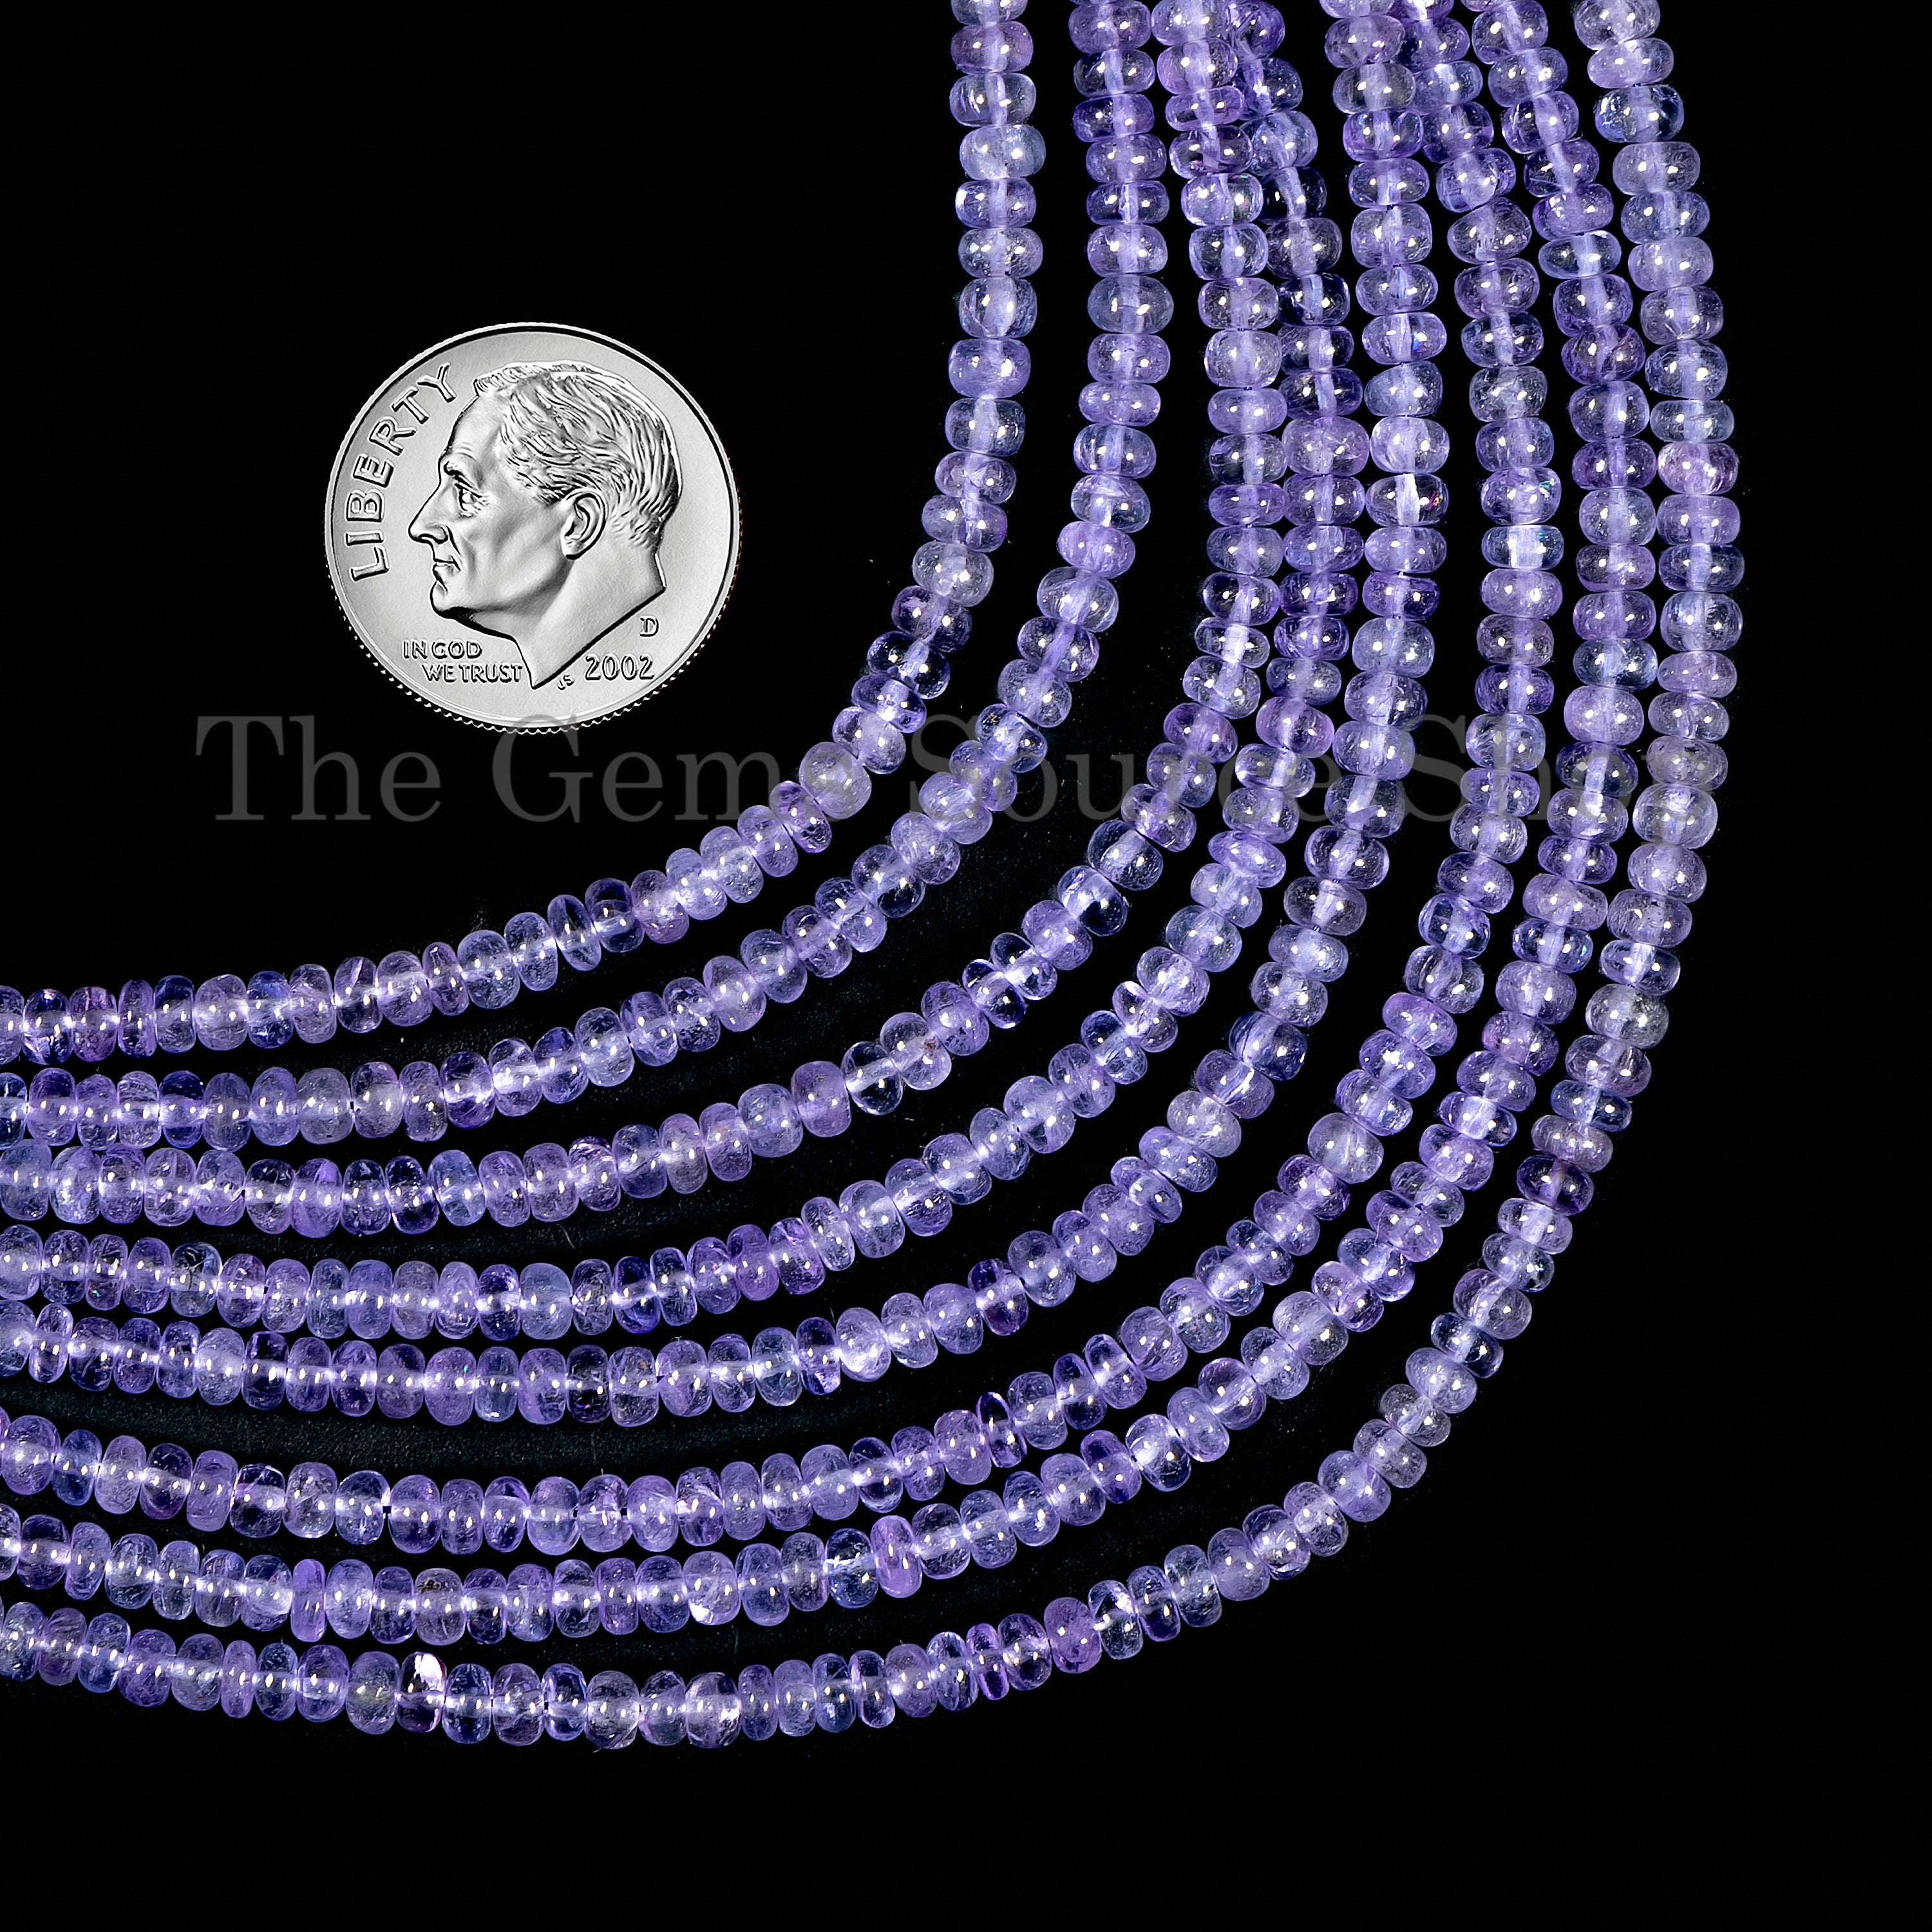 Tanzanite Plain Rondelle Beads, 3-4 mm Natural Tanzanite Gemstone Beads, Smooth Rondelle Tanzanite Beads for Jewelry Making TGS-5046